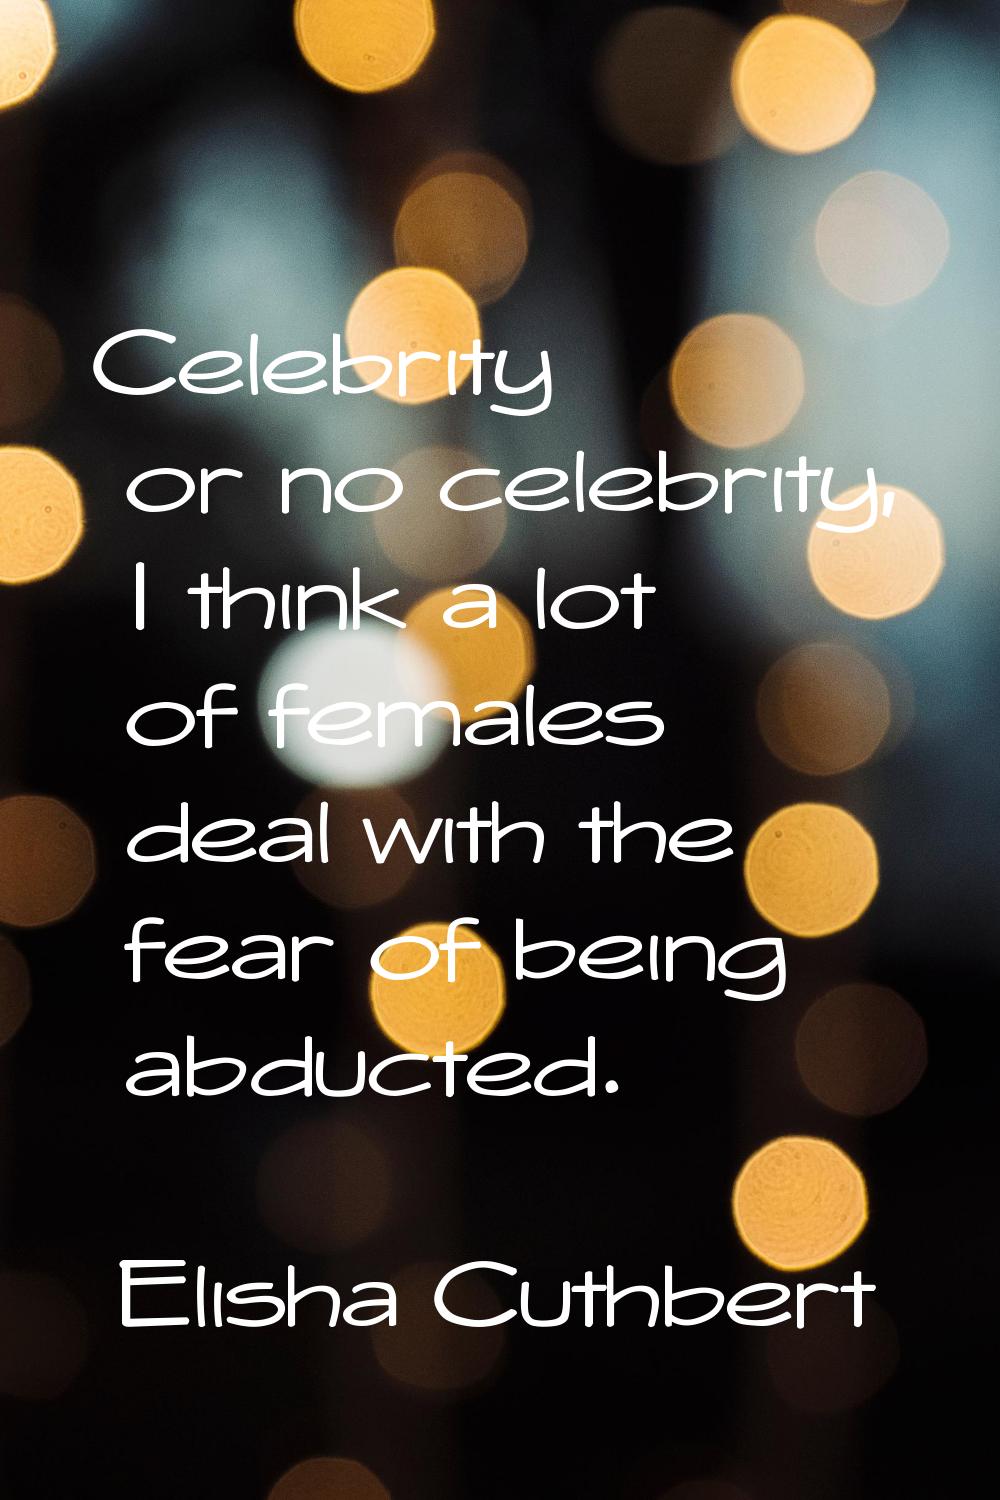 Celebrity or no celebrity, I think a lot of females deal with the fear of being abducted.